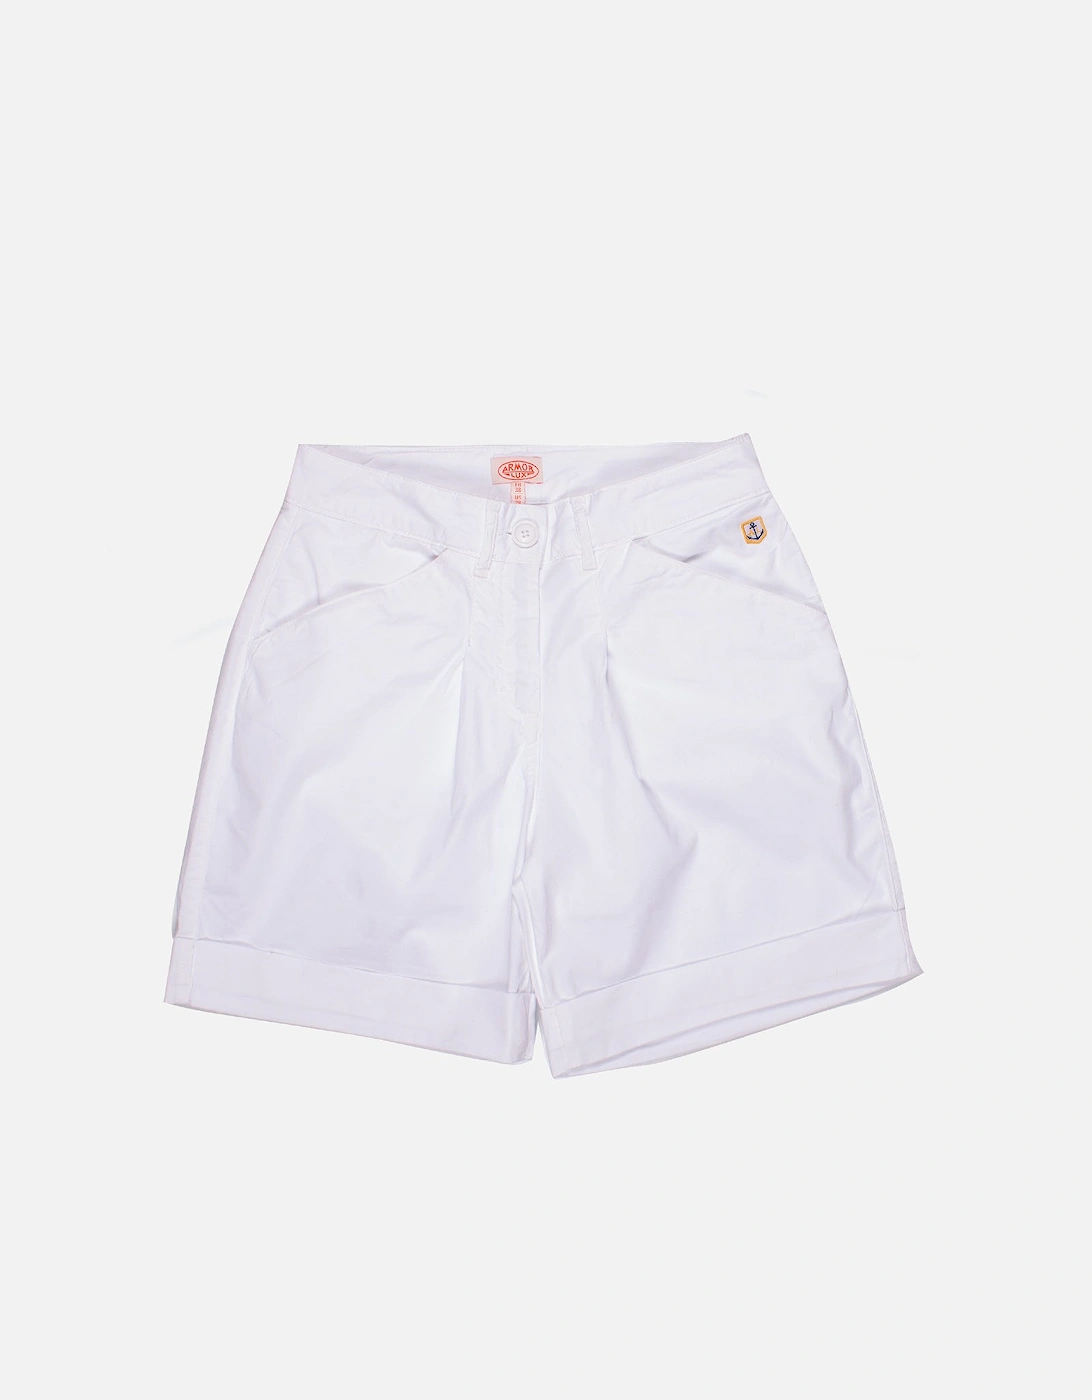 Armor-Lux Women Shorts - White, 4 of 3